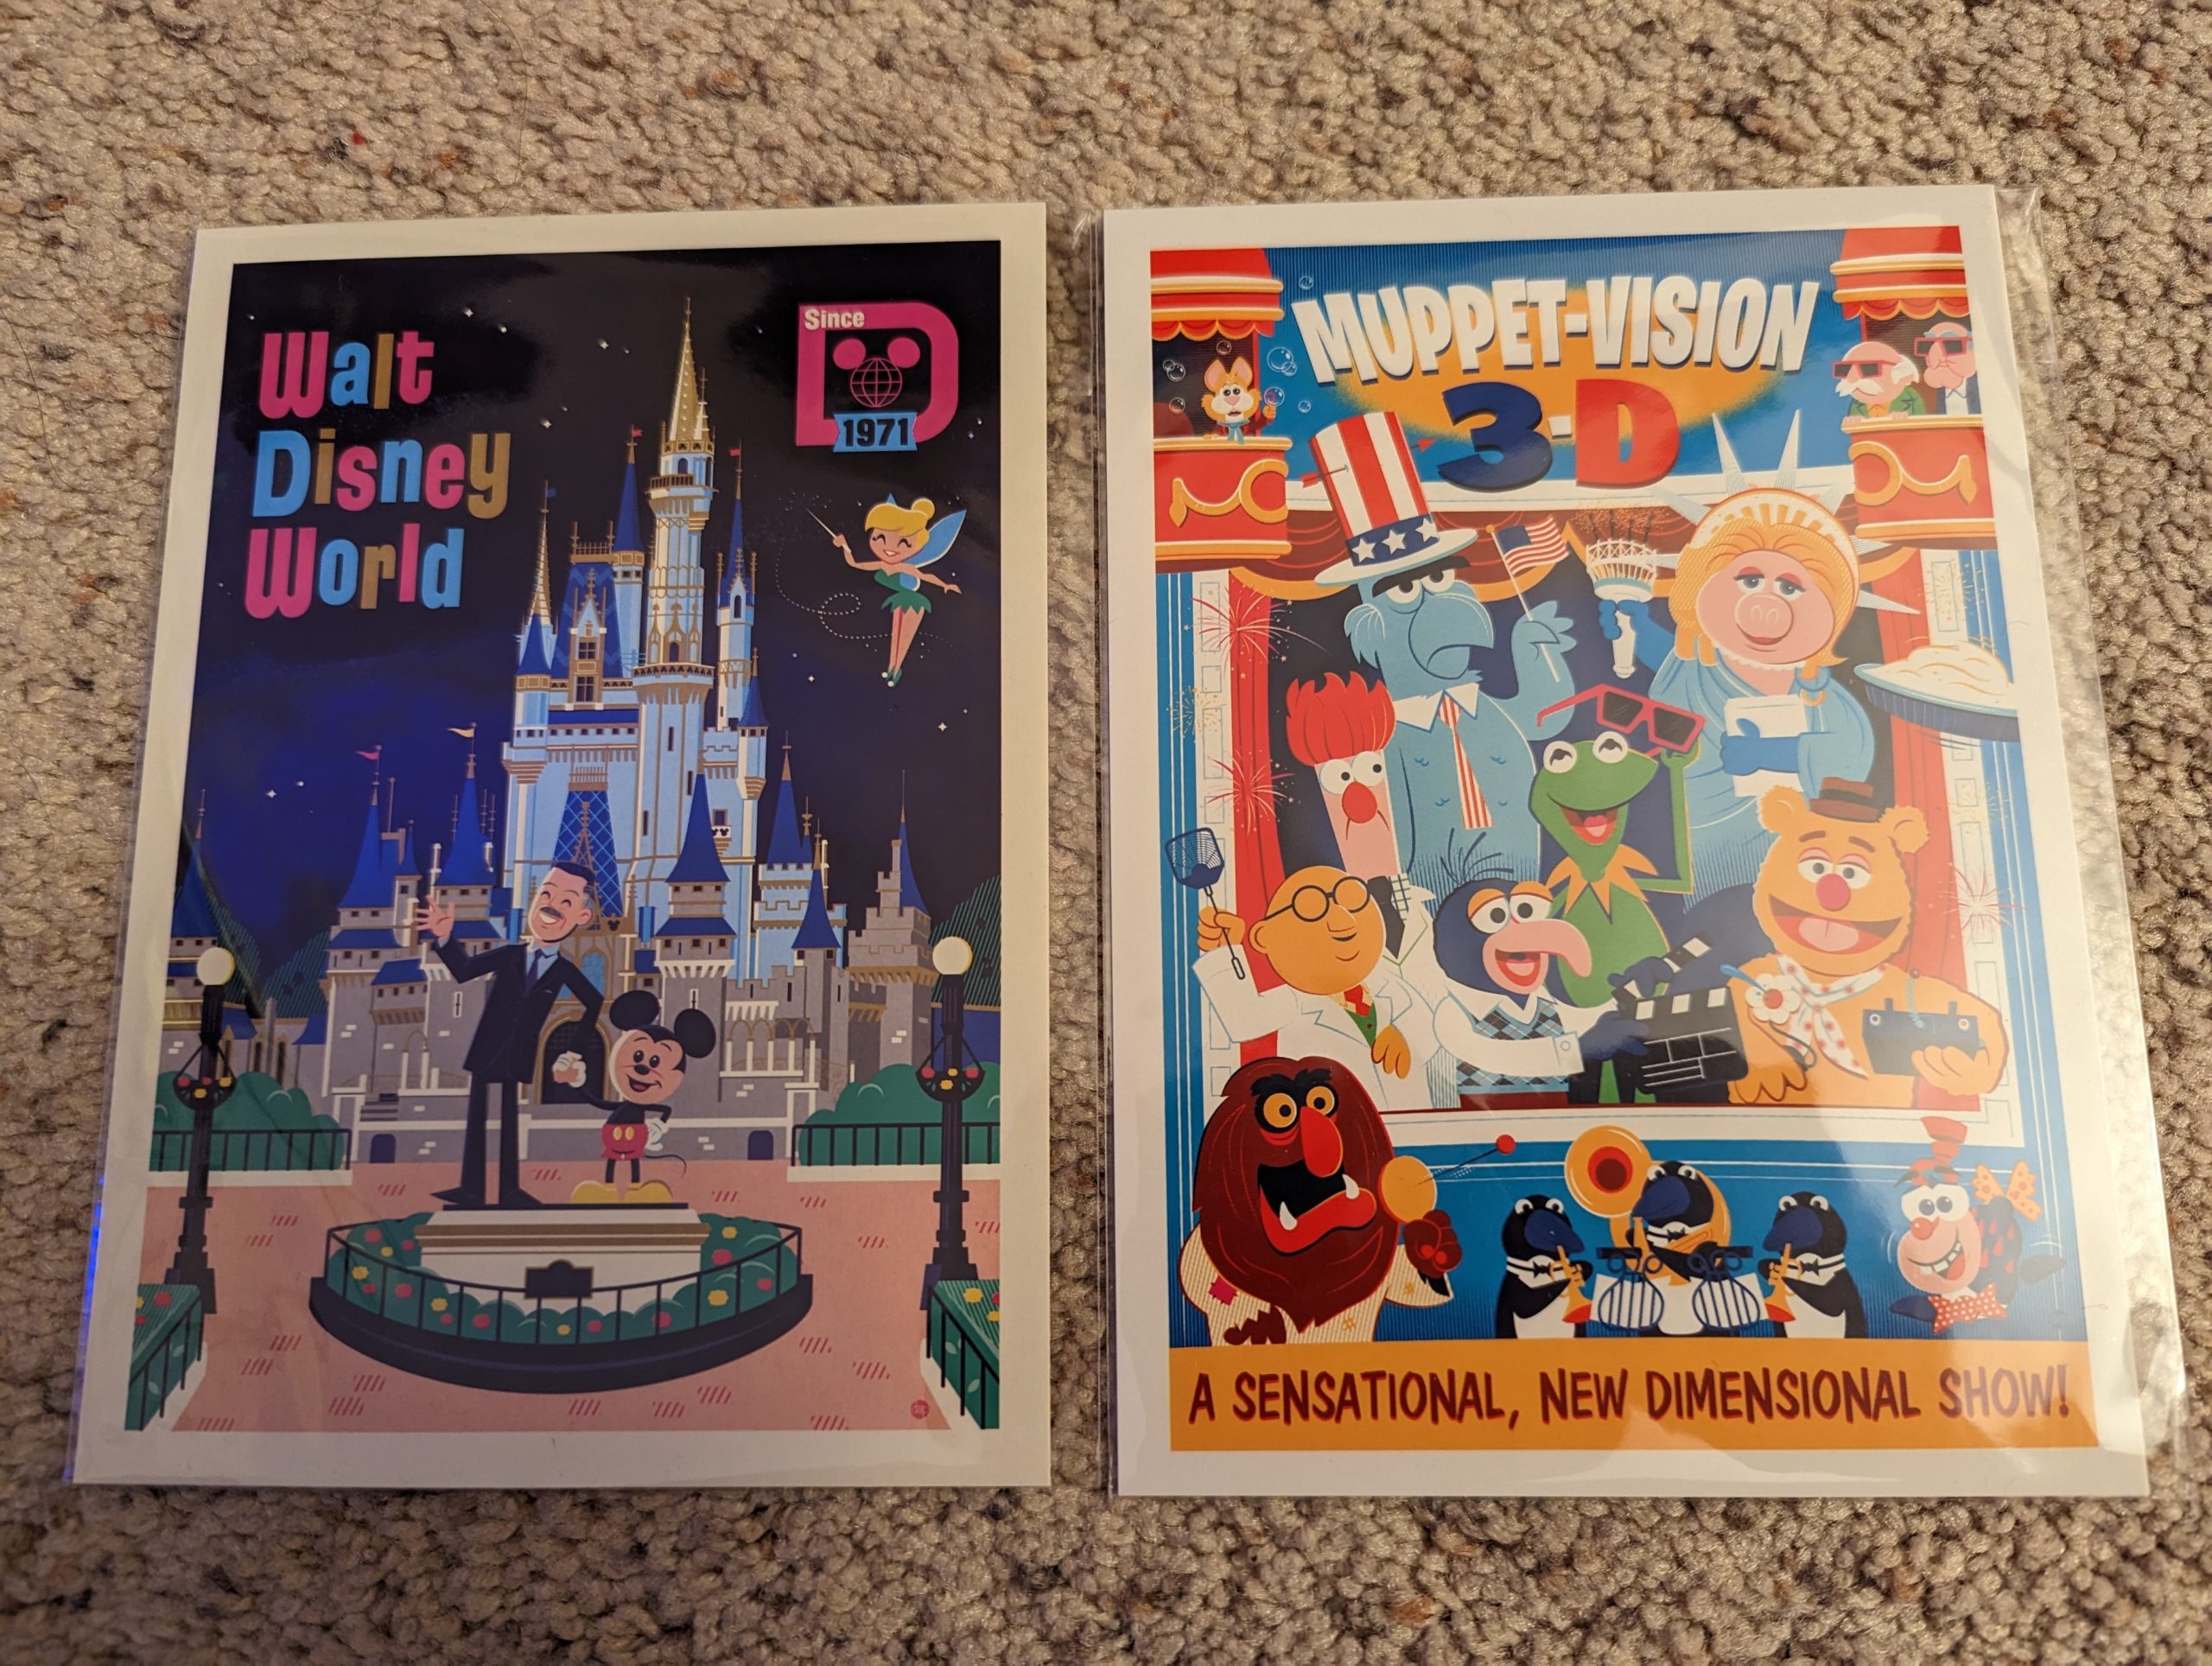 two postcards: Walt Disney World and Muppet-Vision 3D